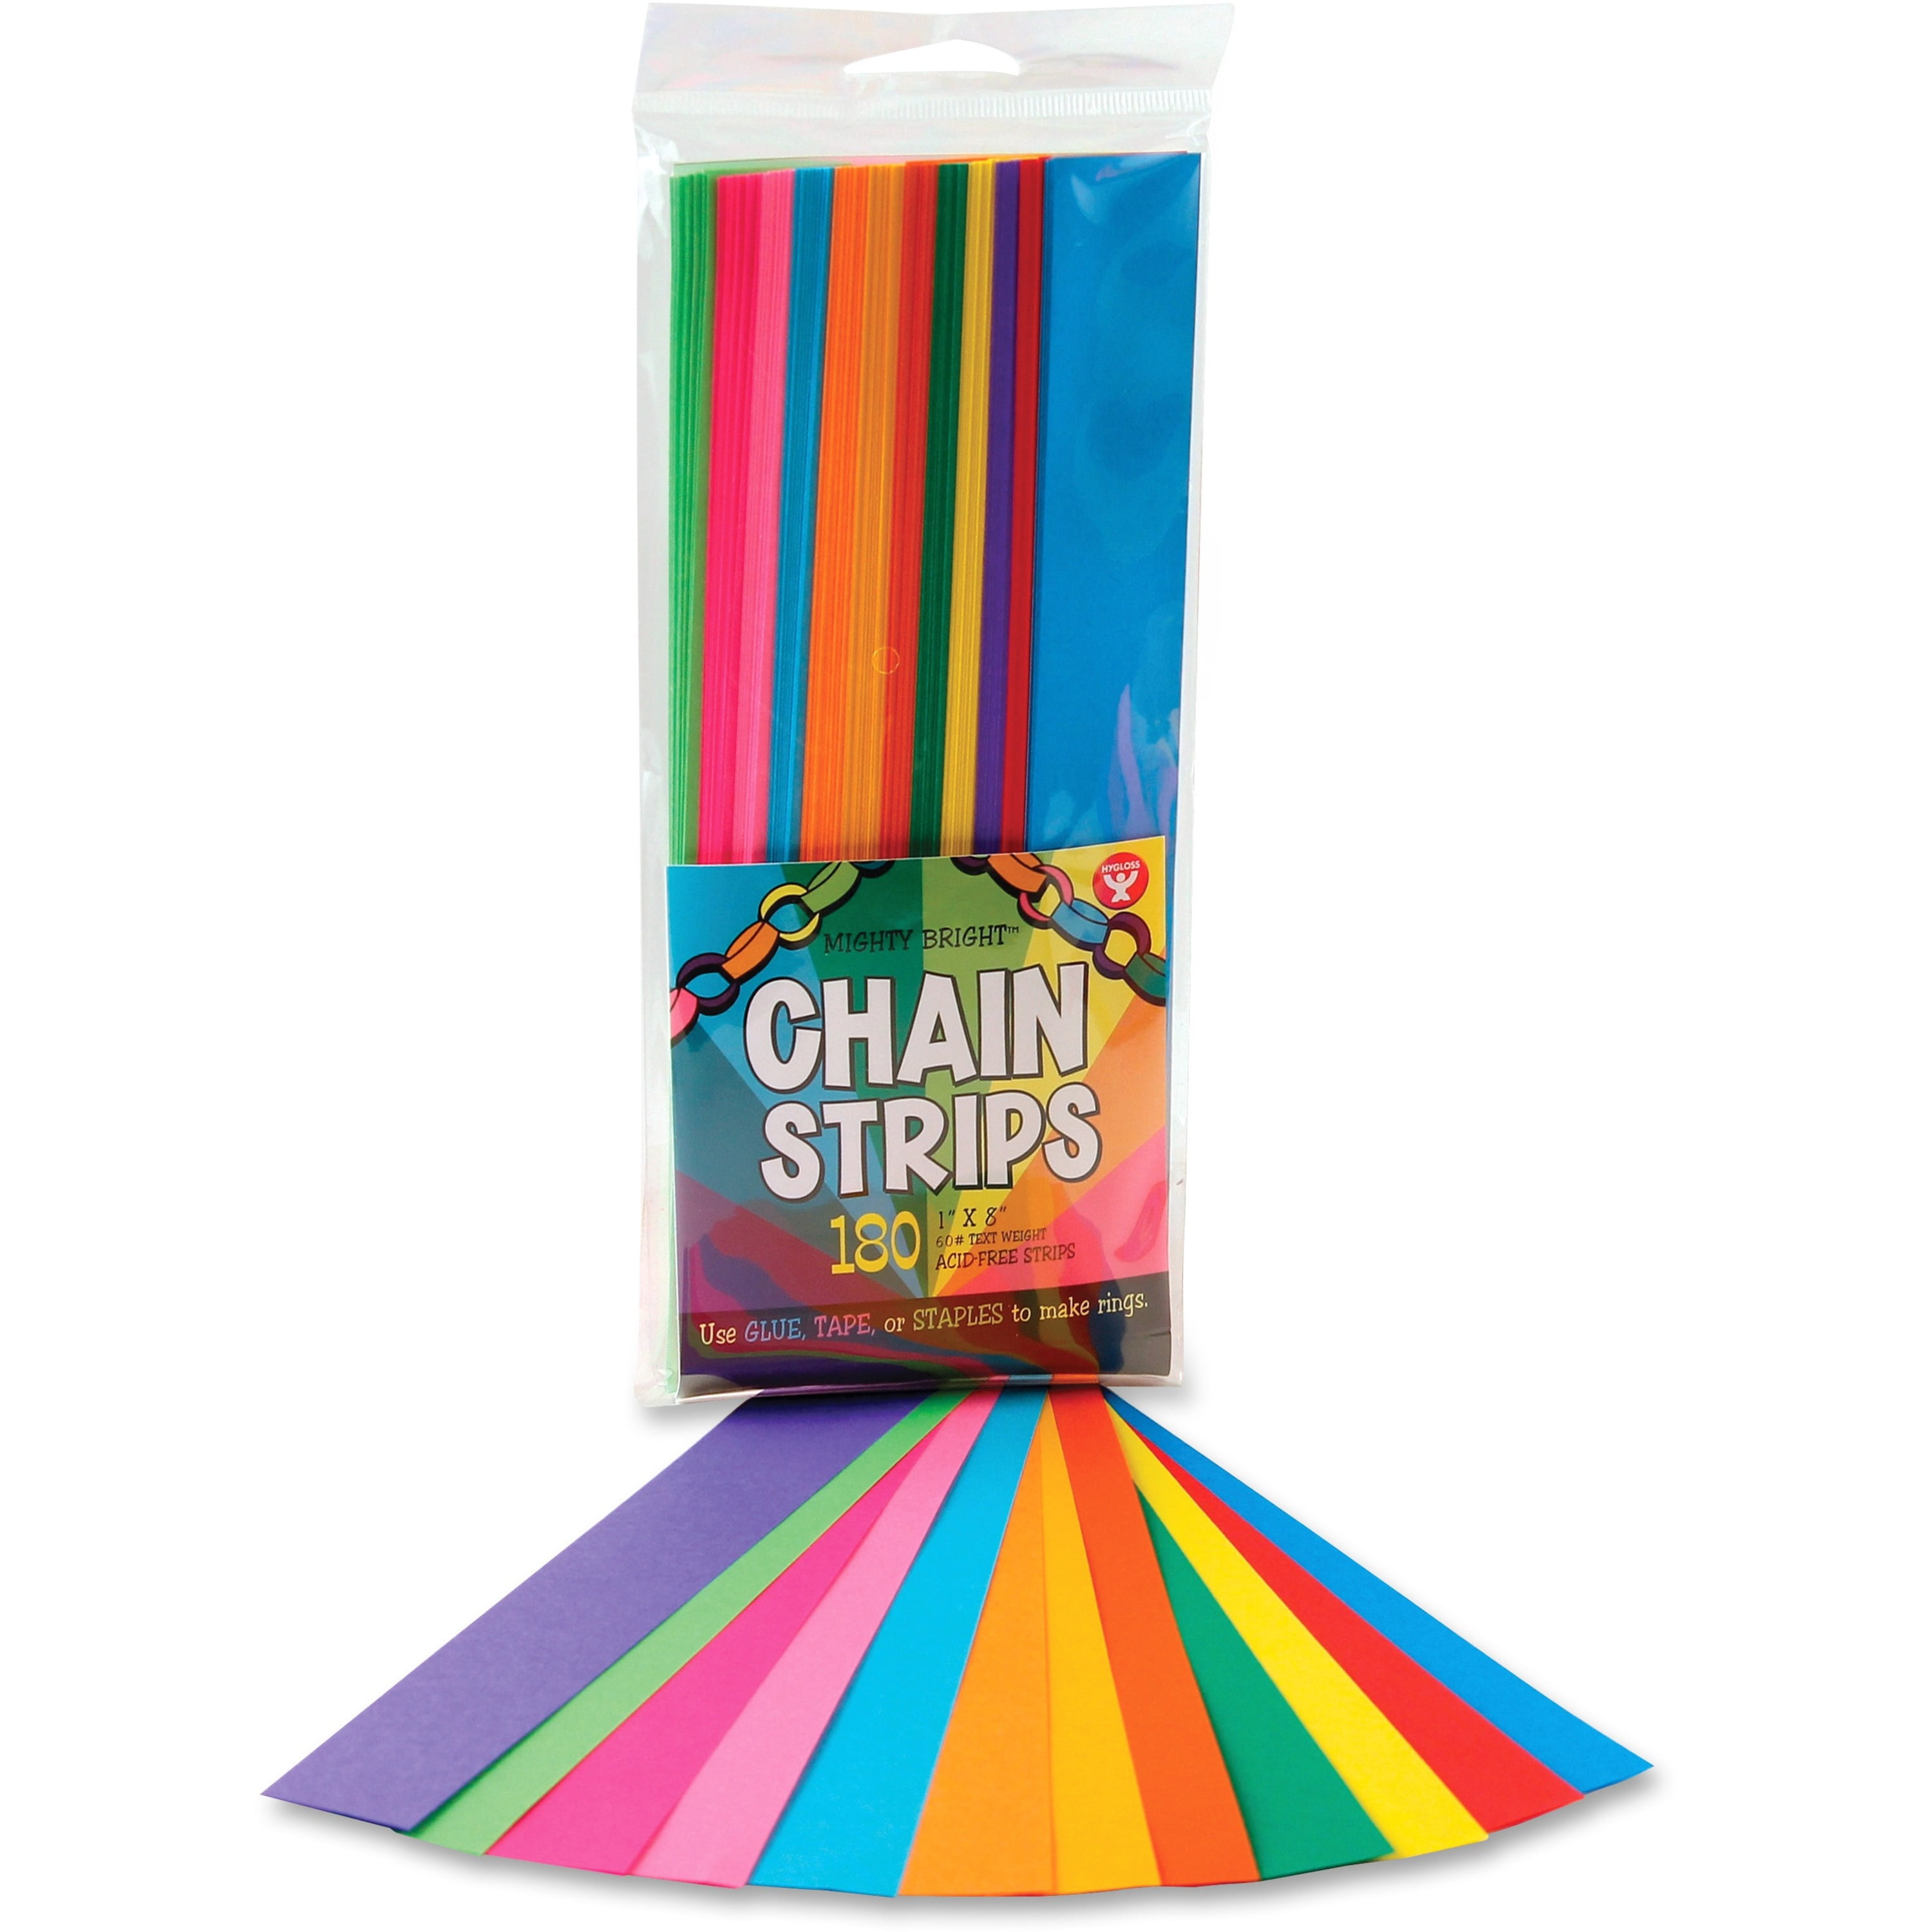 300 Paper Chain Strips for Crafting. No Glue or Tape Needed. Kid Friendly  Family Fun. 10 Bright Colors, Yields 50 Feet of Paper Links